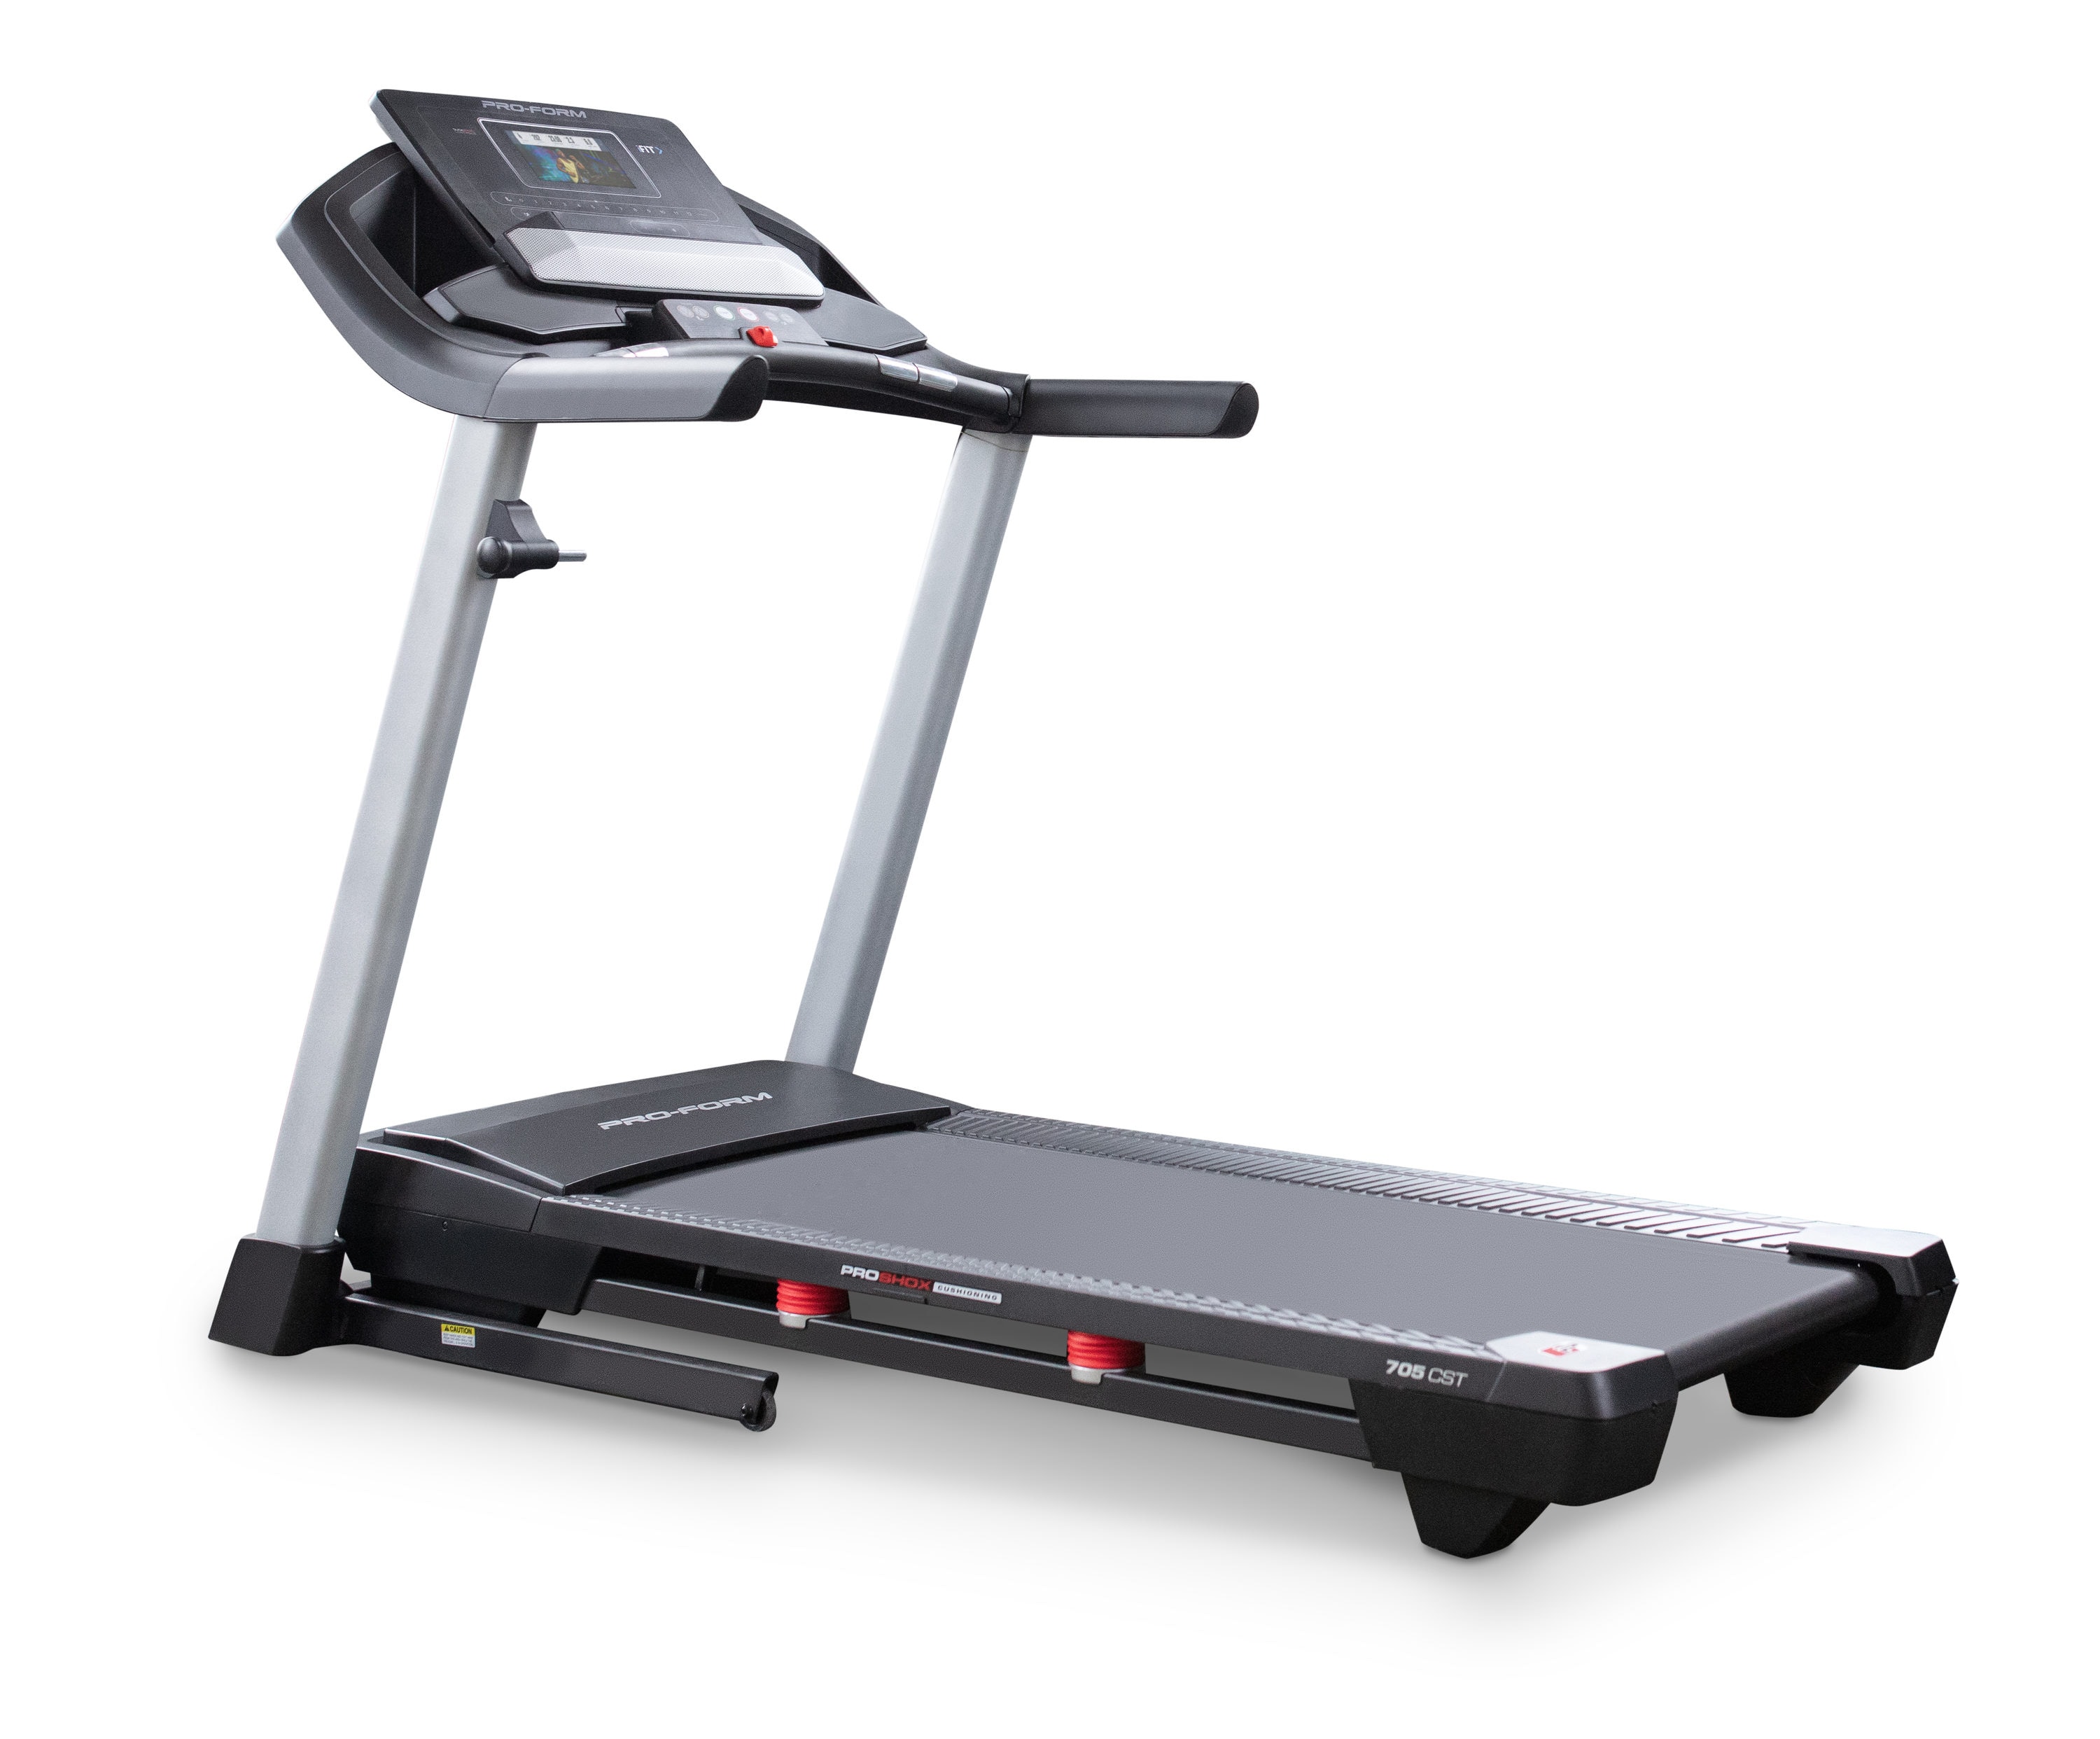 Proform Treadmill Portable Foldable Treadmill Great Little Treadmill MZXDX Treadmills for Home Very Lightweight and Easy to Set Up Easy to Put Sunny Health and Fitness 